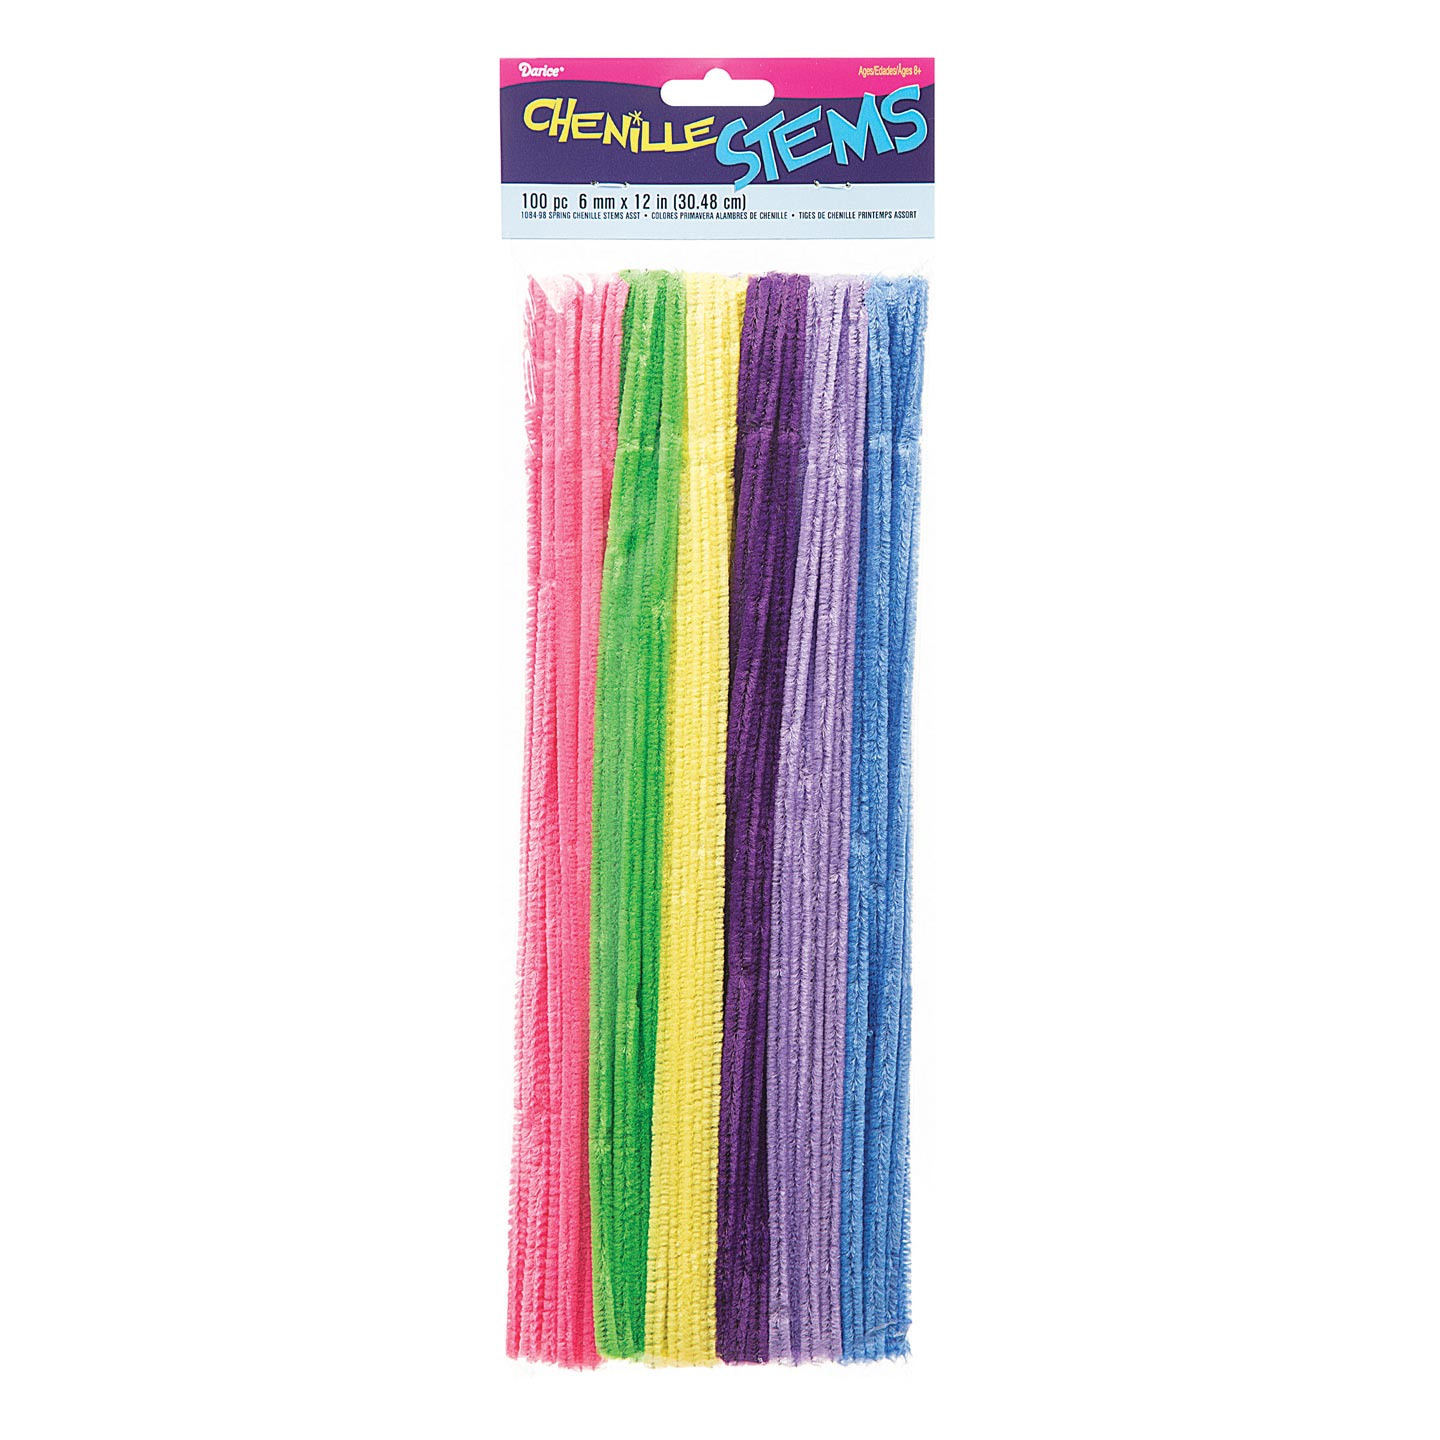 long 12" 6mm wide 10 pack SAGE GREEN chenille craft stems pipe cleaners 30cm 